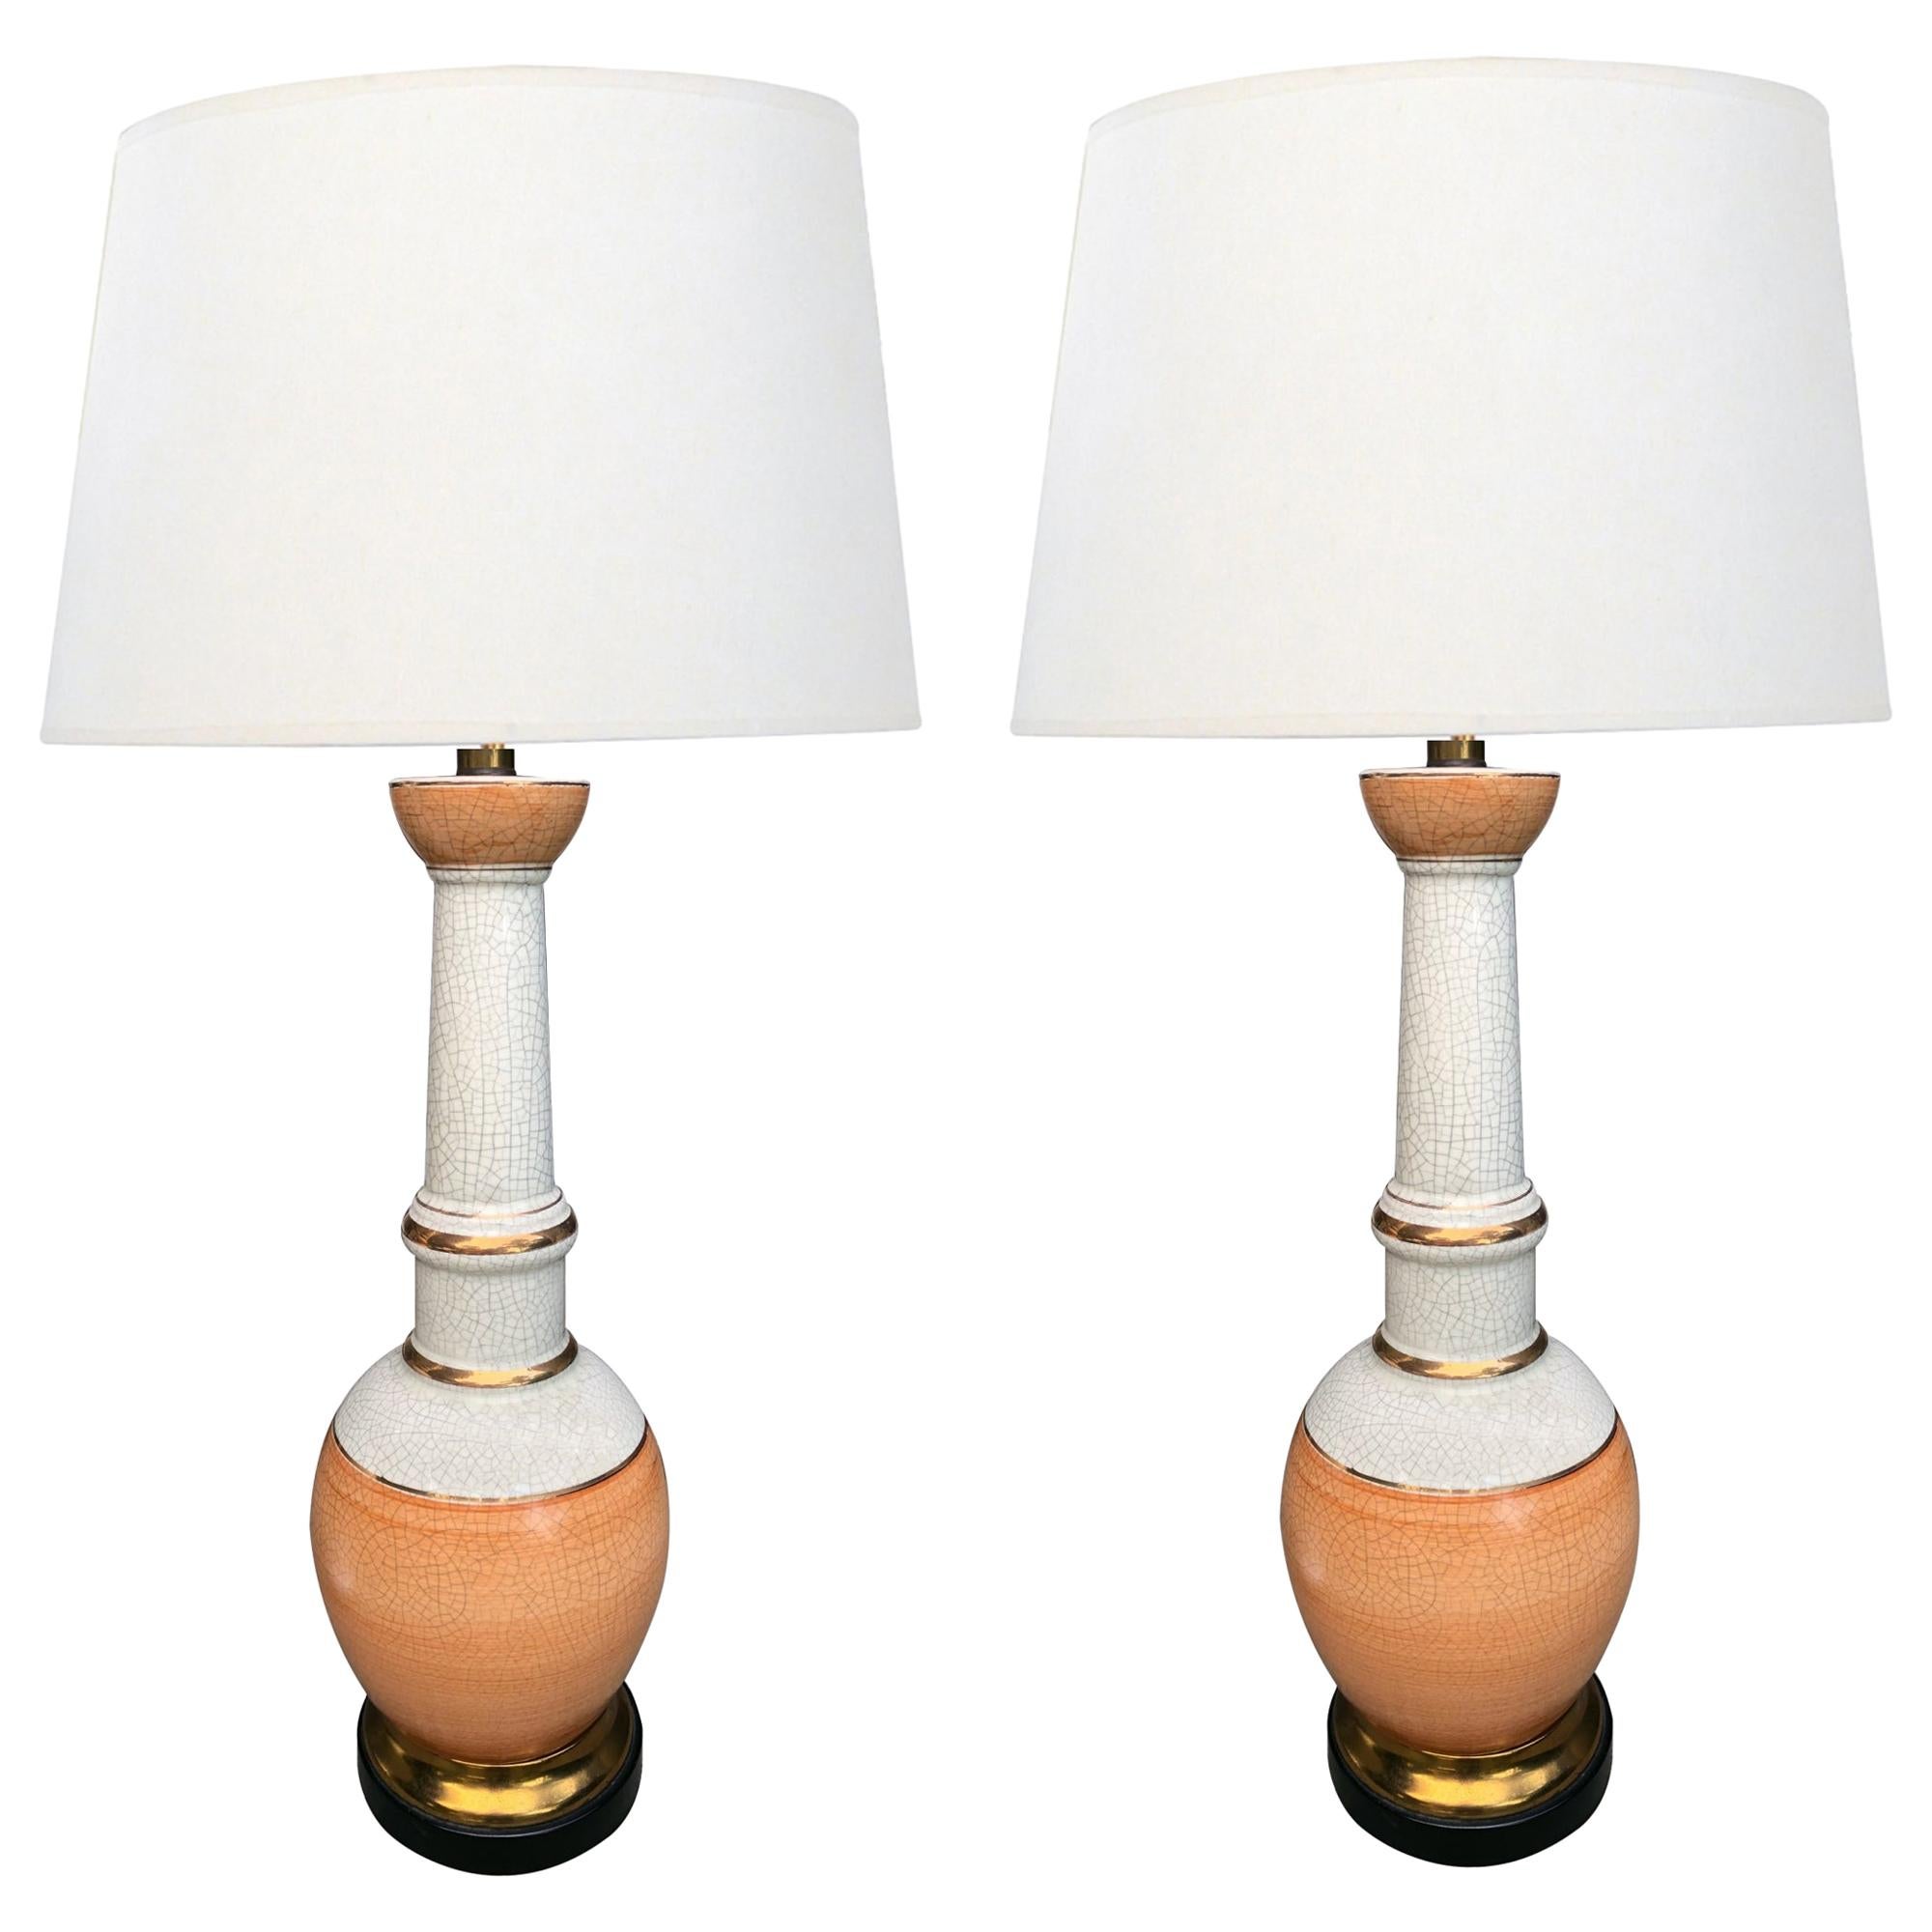 Stylish Pair of Frederick Cooper 1960s Peach and White Crackle-Glaze Lamps